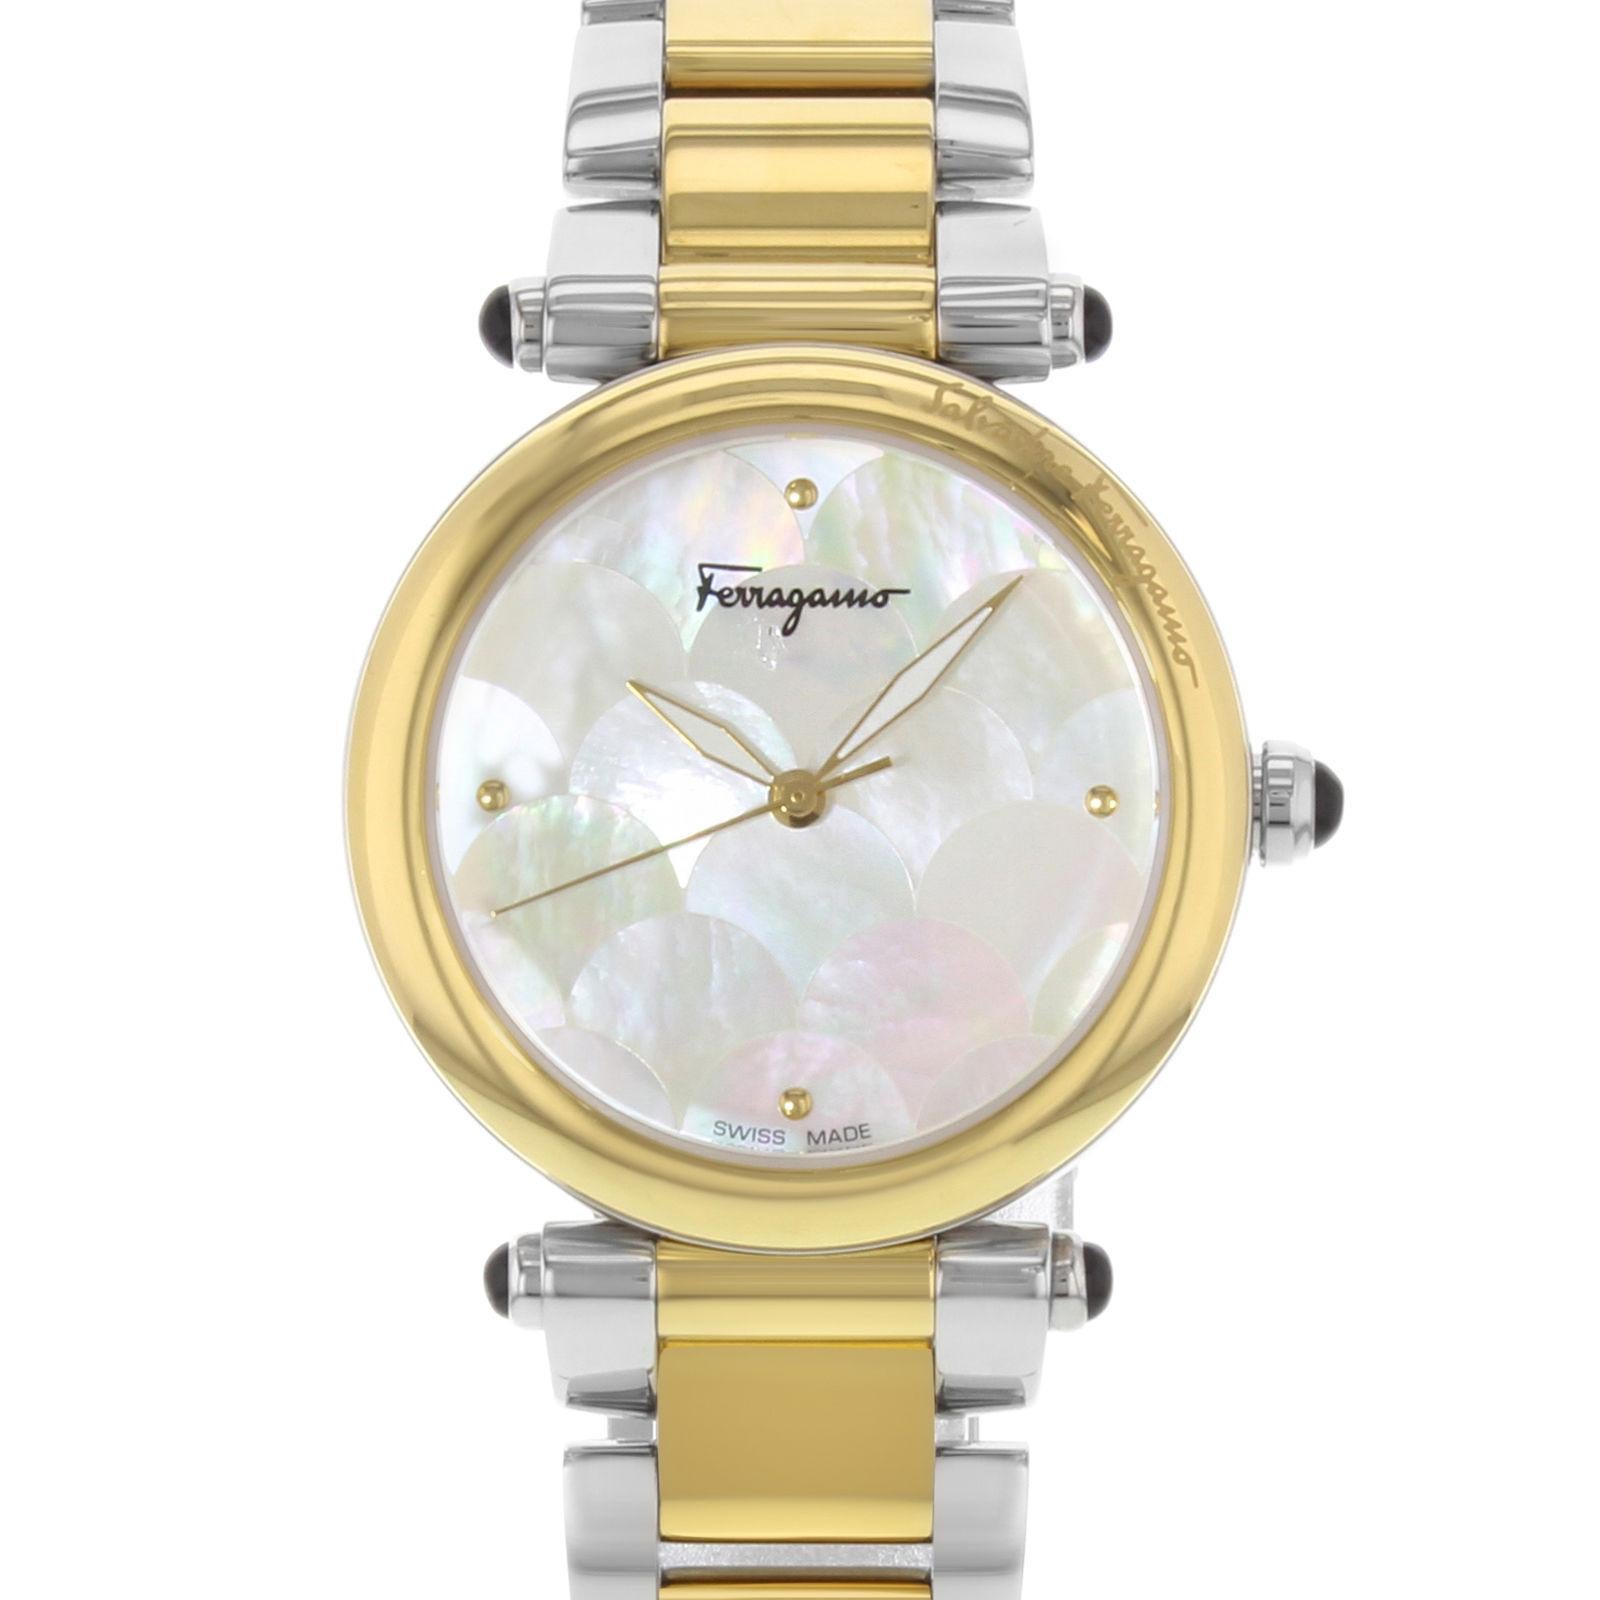 (19656)
This display model Salvatore Ferragamo Idillio FCH060016 is a beautiful Ladies timepiece that is powered by a quartz movement which is cased in a stainless steel case. It has a round shape face, no features dial and has hand dots style